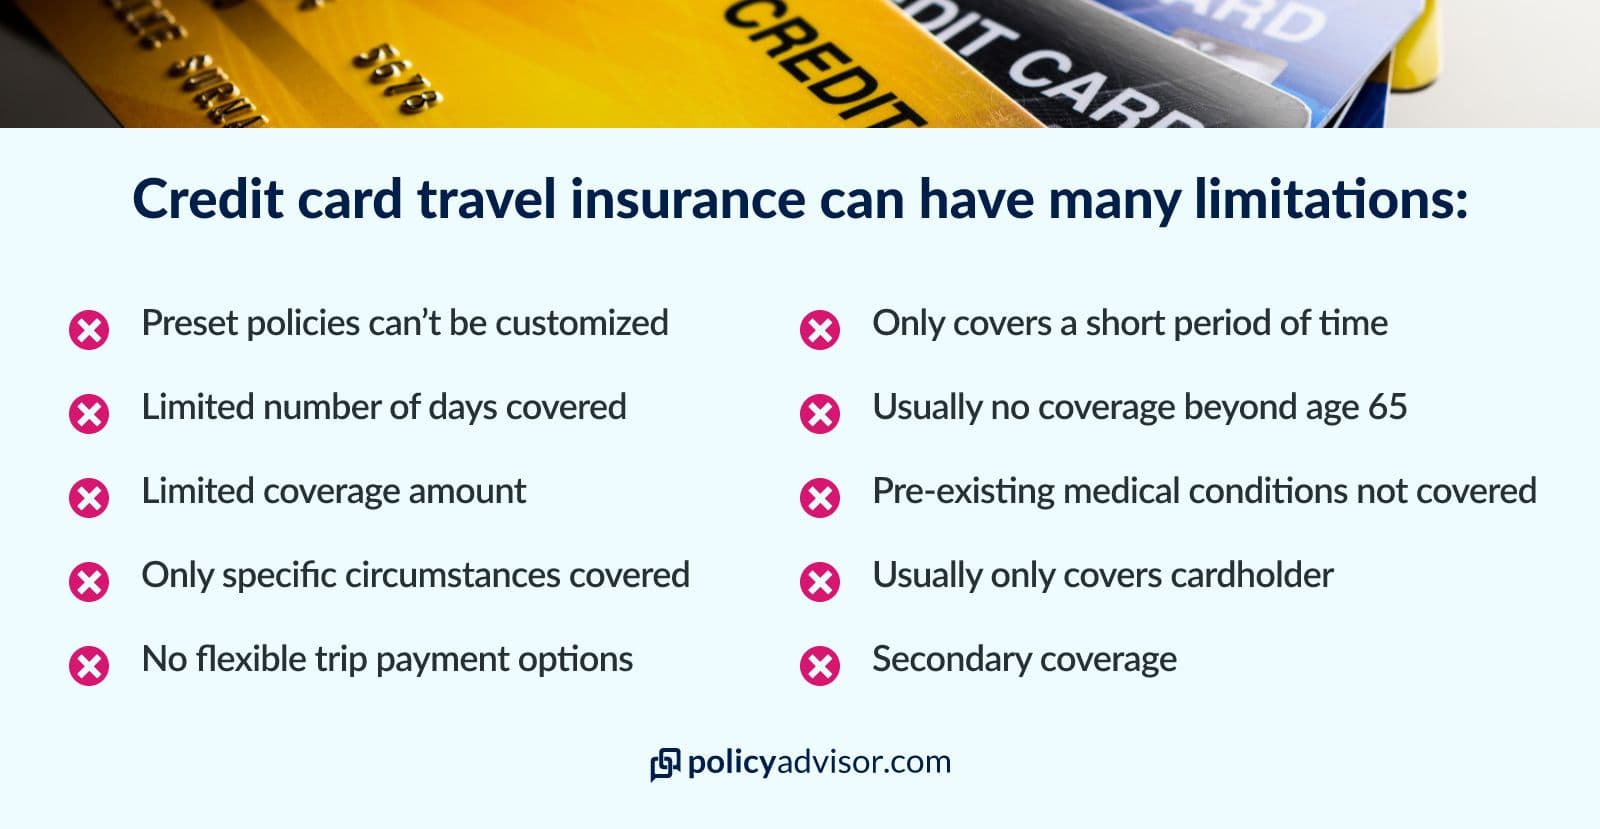 Credit card travel insurance can have many limitations compared to individually owned travel insurance.